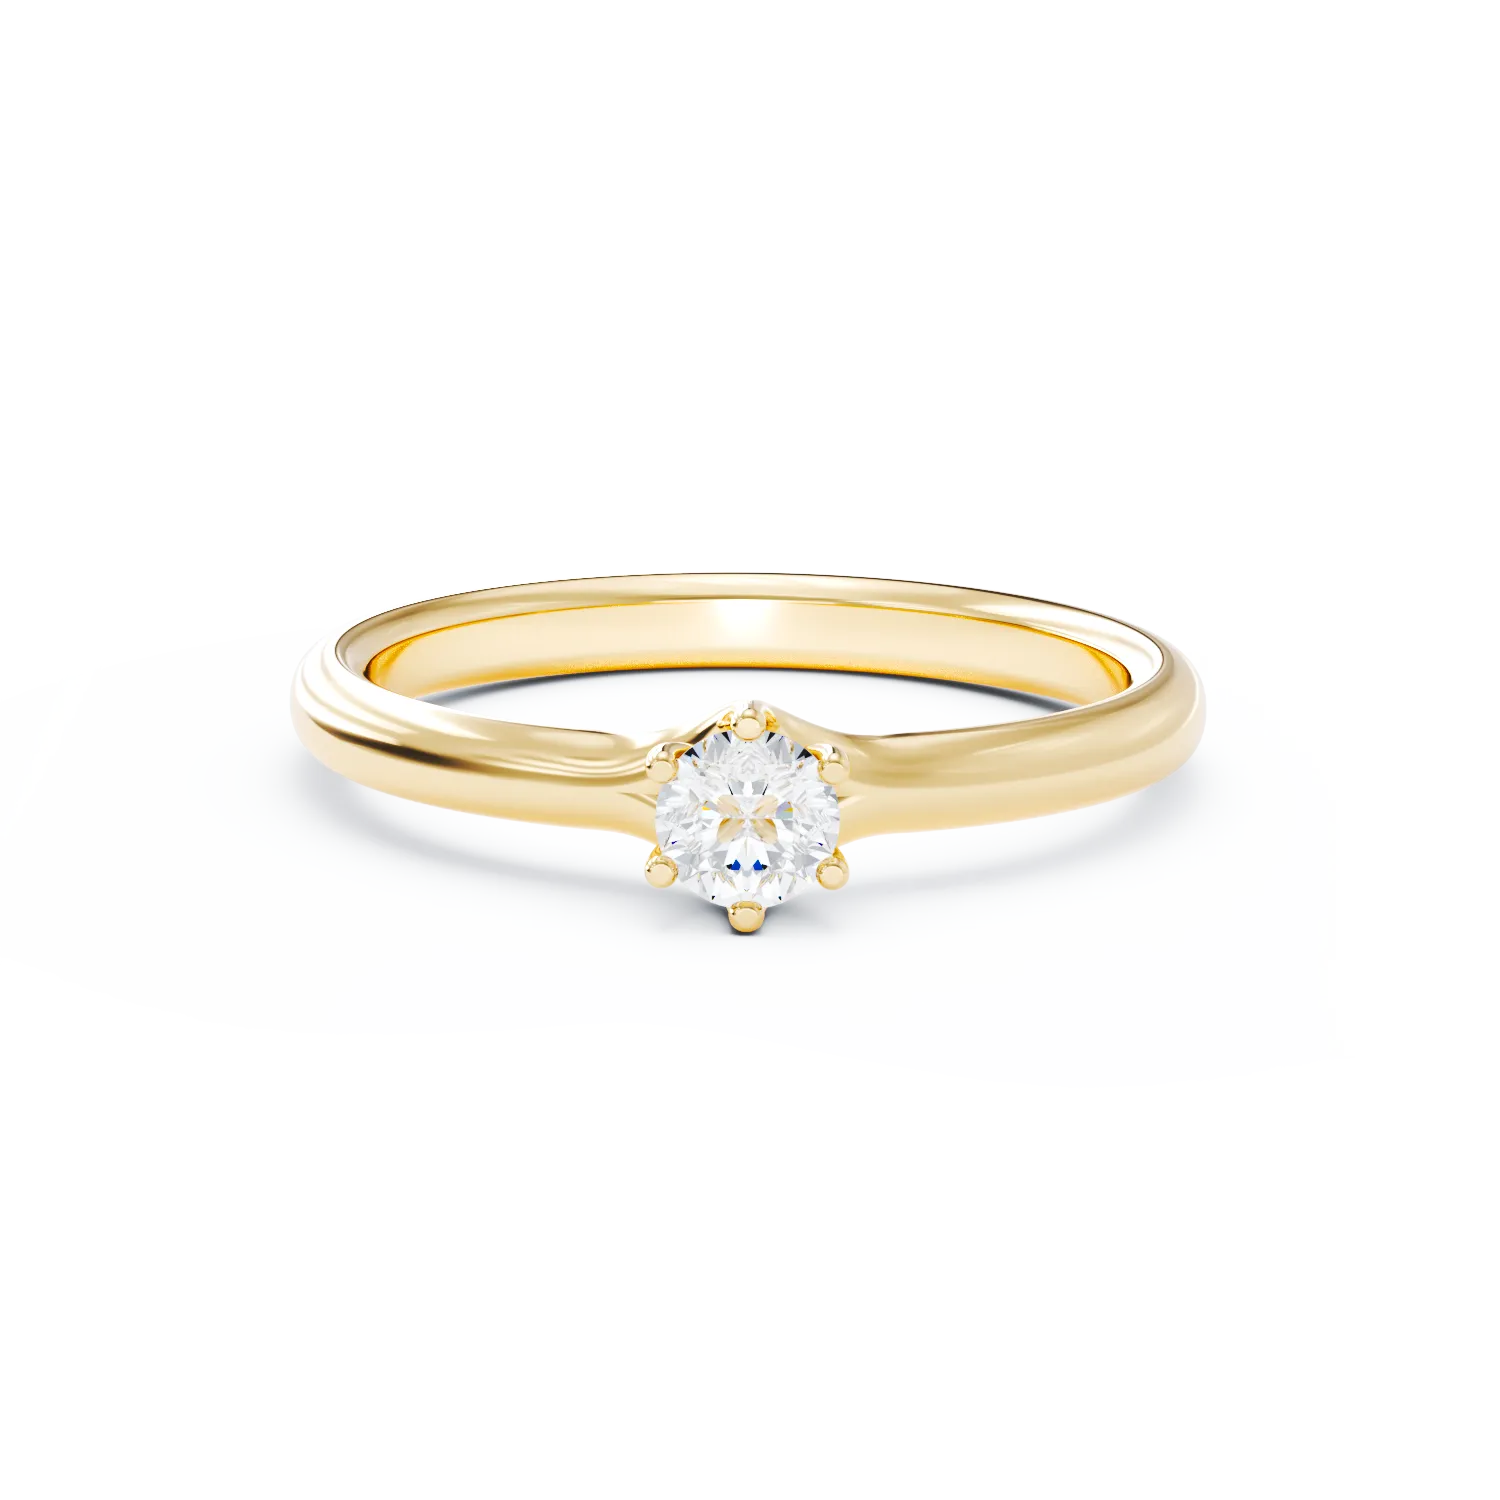 Yellow gold engagement ring with 0.24ct solitaire diamond